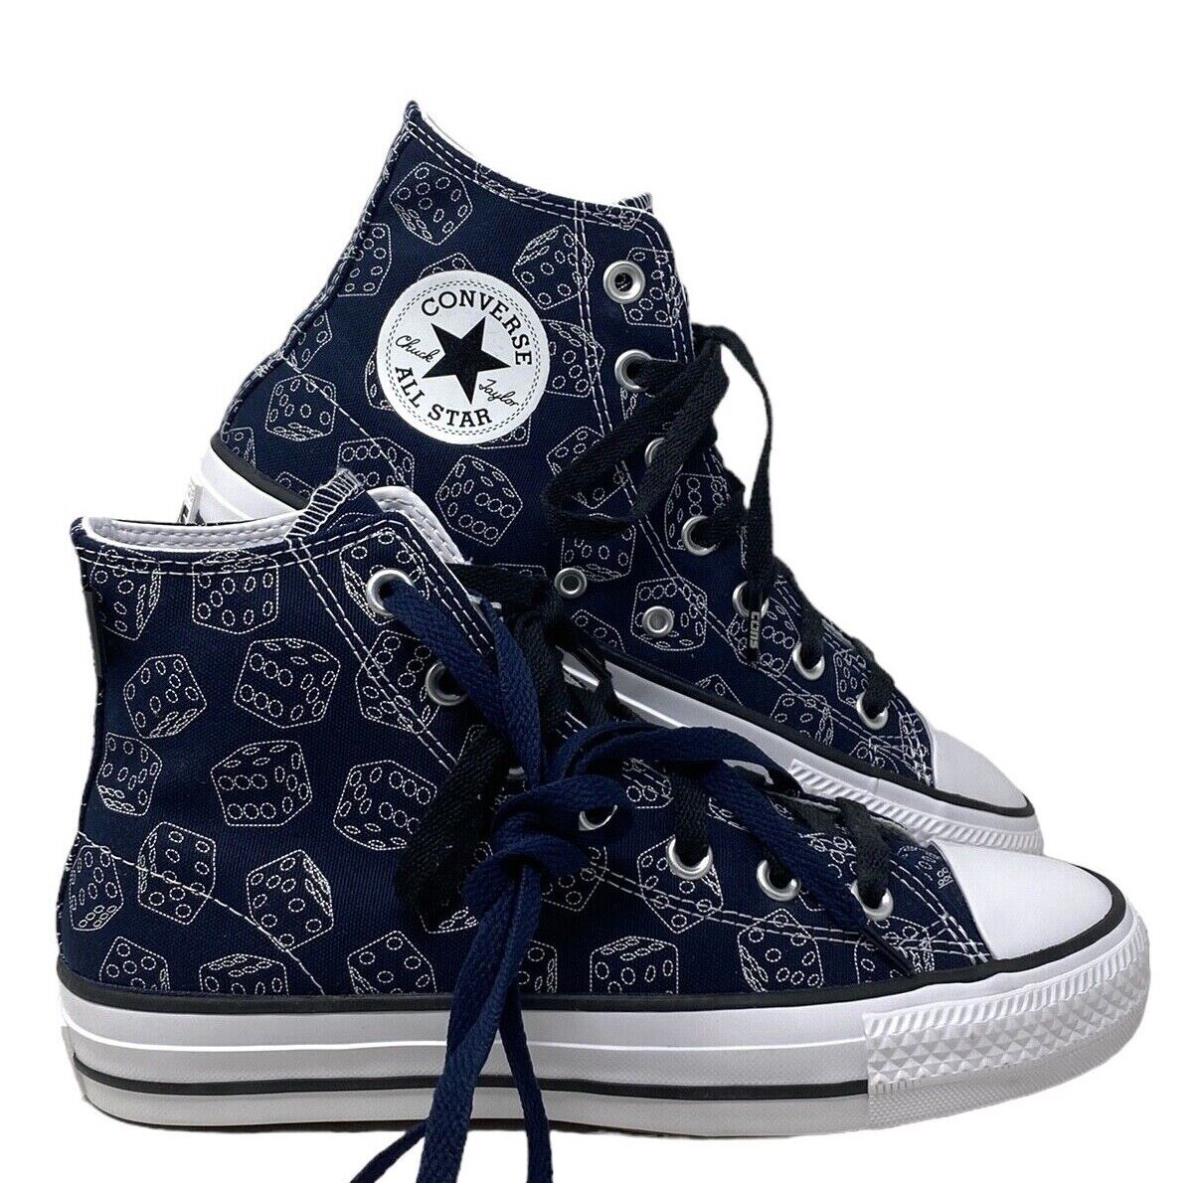 Converse Cons Chuck Taylor Pro High Top Shoes Navy Casual Men`s Sneakers A03222C